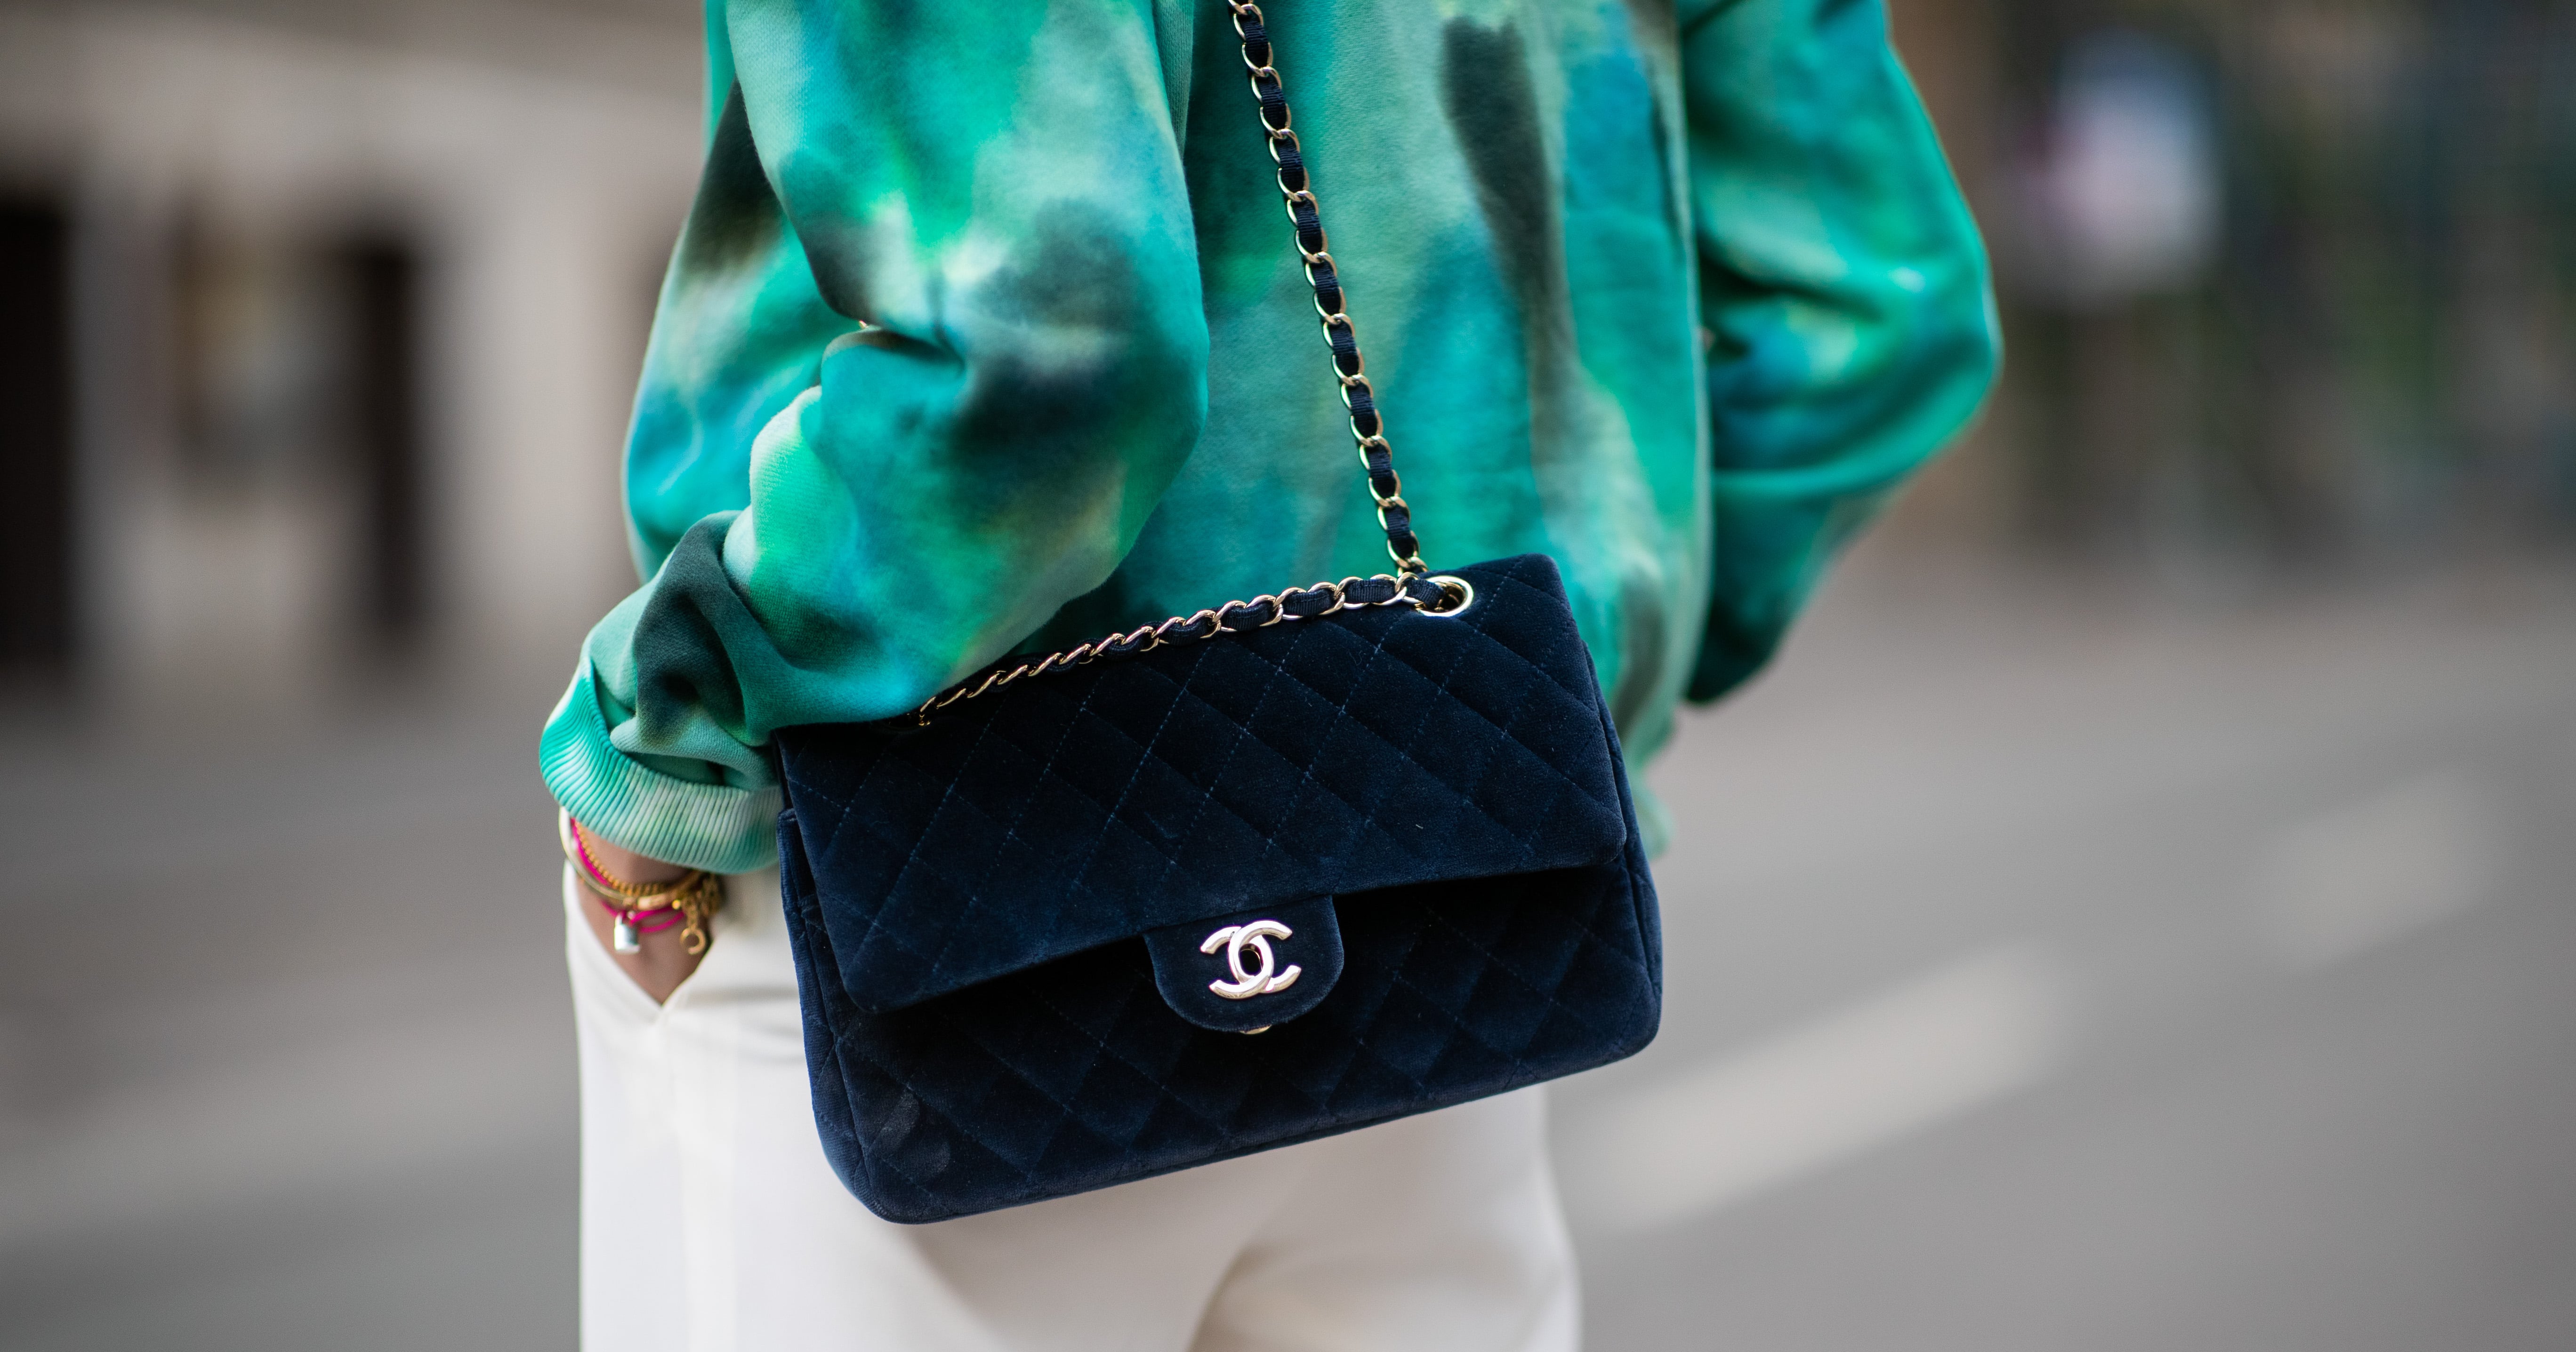 The Best Luxury Fashion Brands to Buy and Sell Used